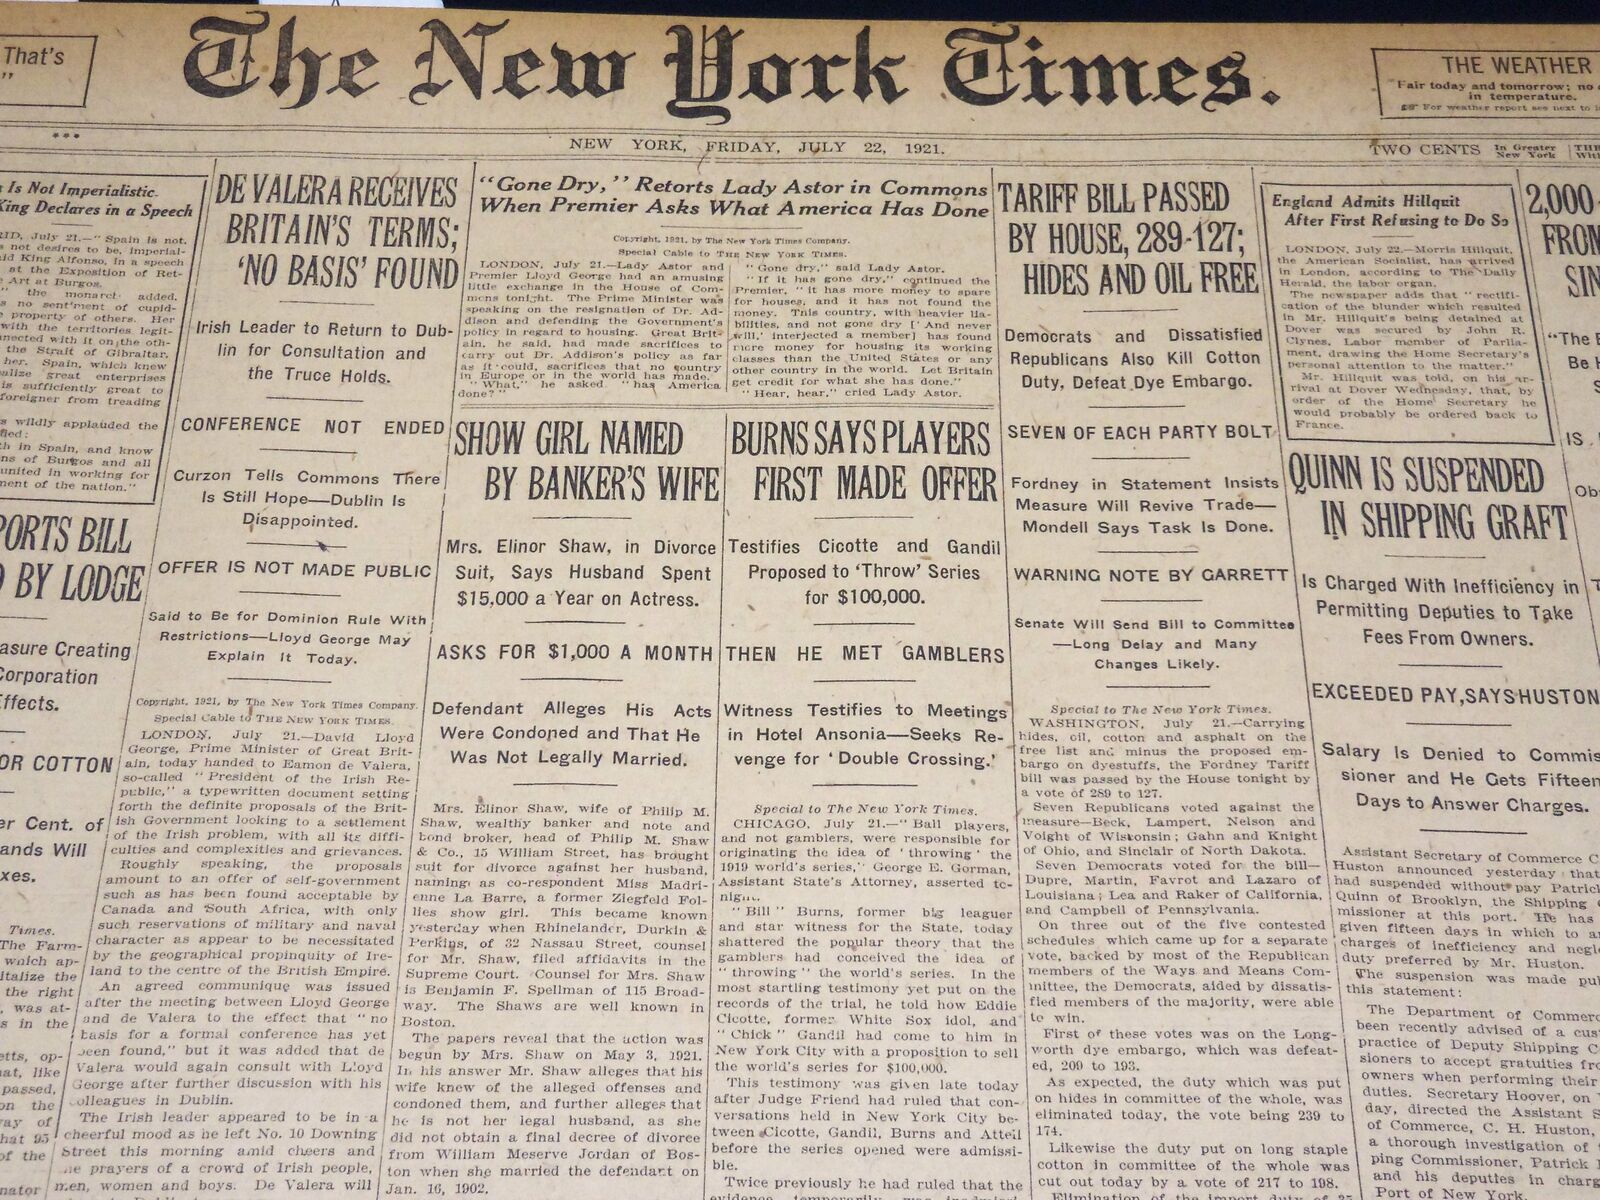 1921 JULY 22 NEW YORK TIMES - BURNS SAYS PLAYERS FIRST MADE OFFER - NT 8713